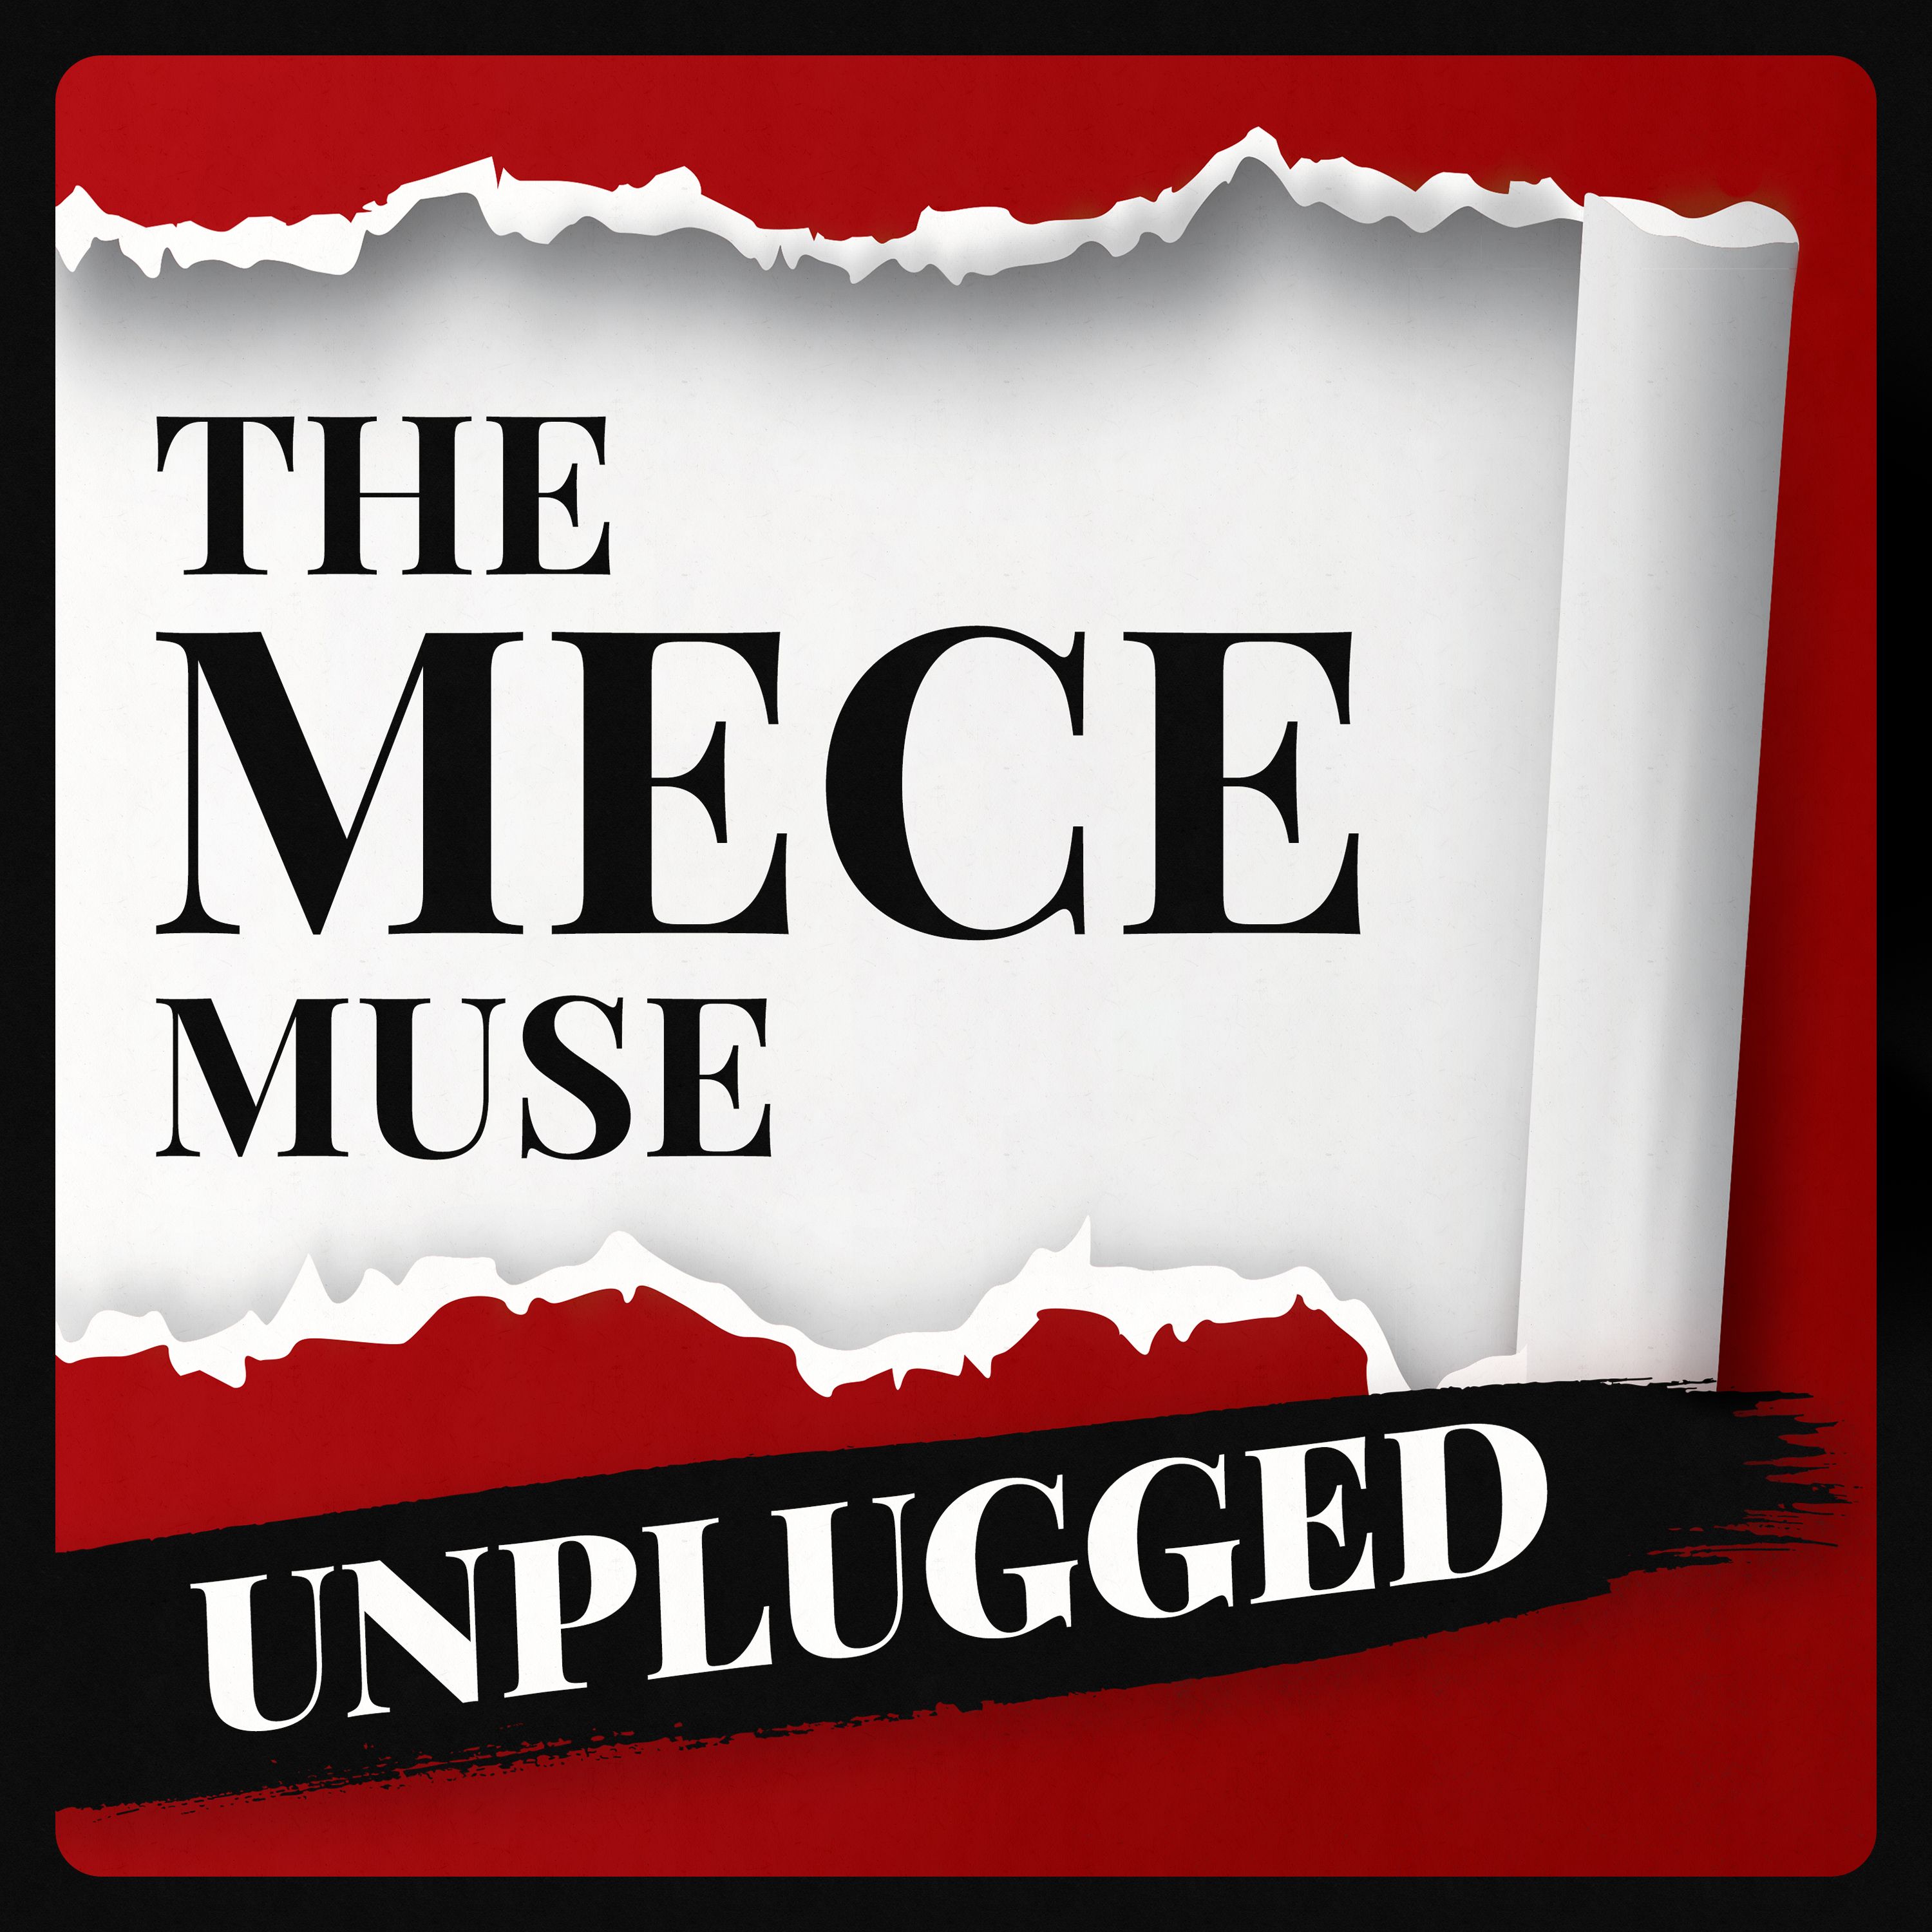 Setting context on The MECE Muse story